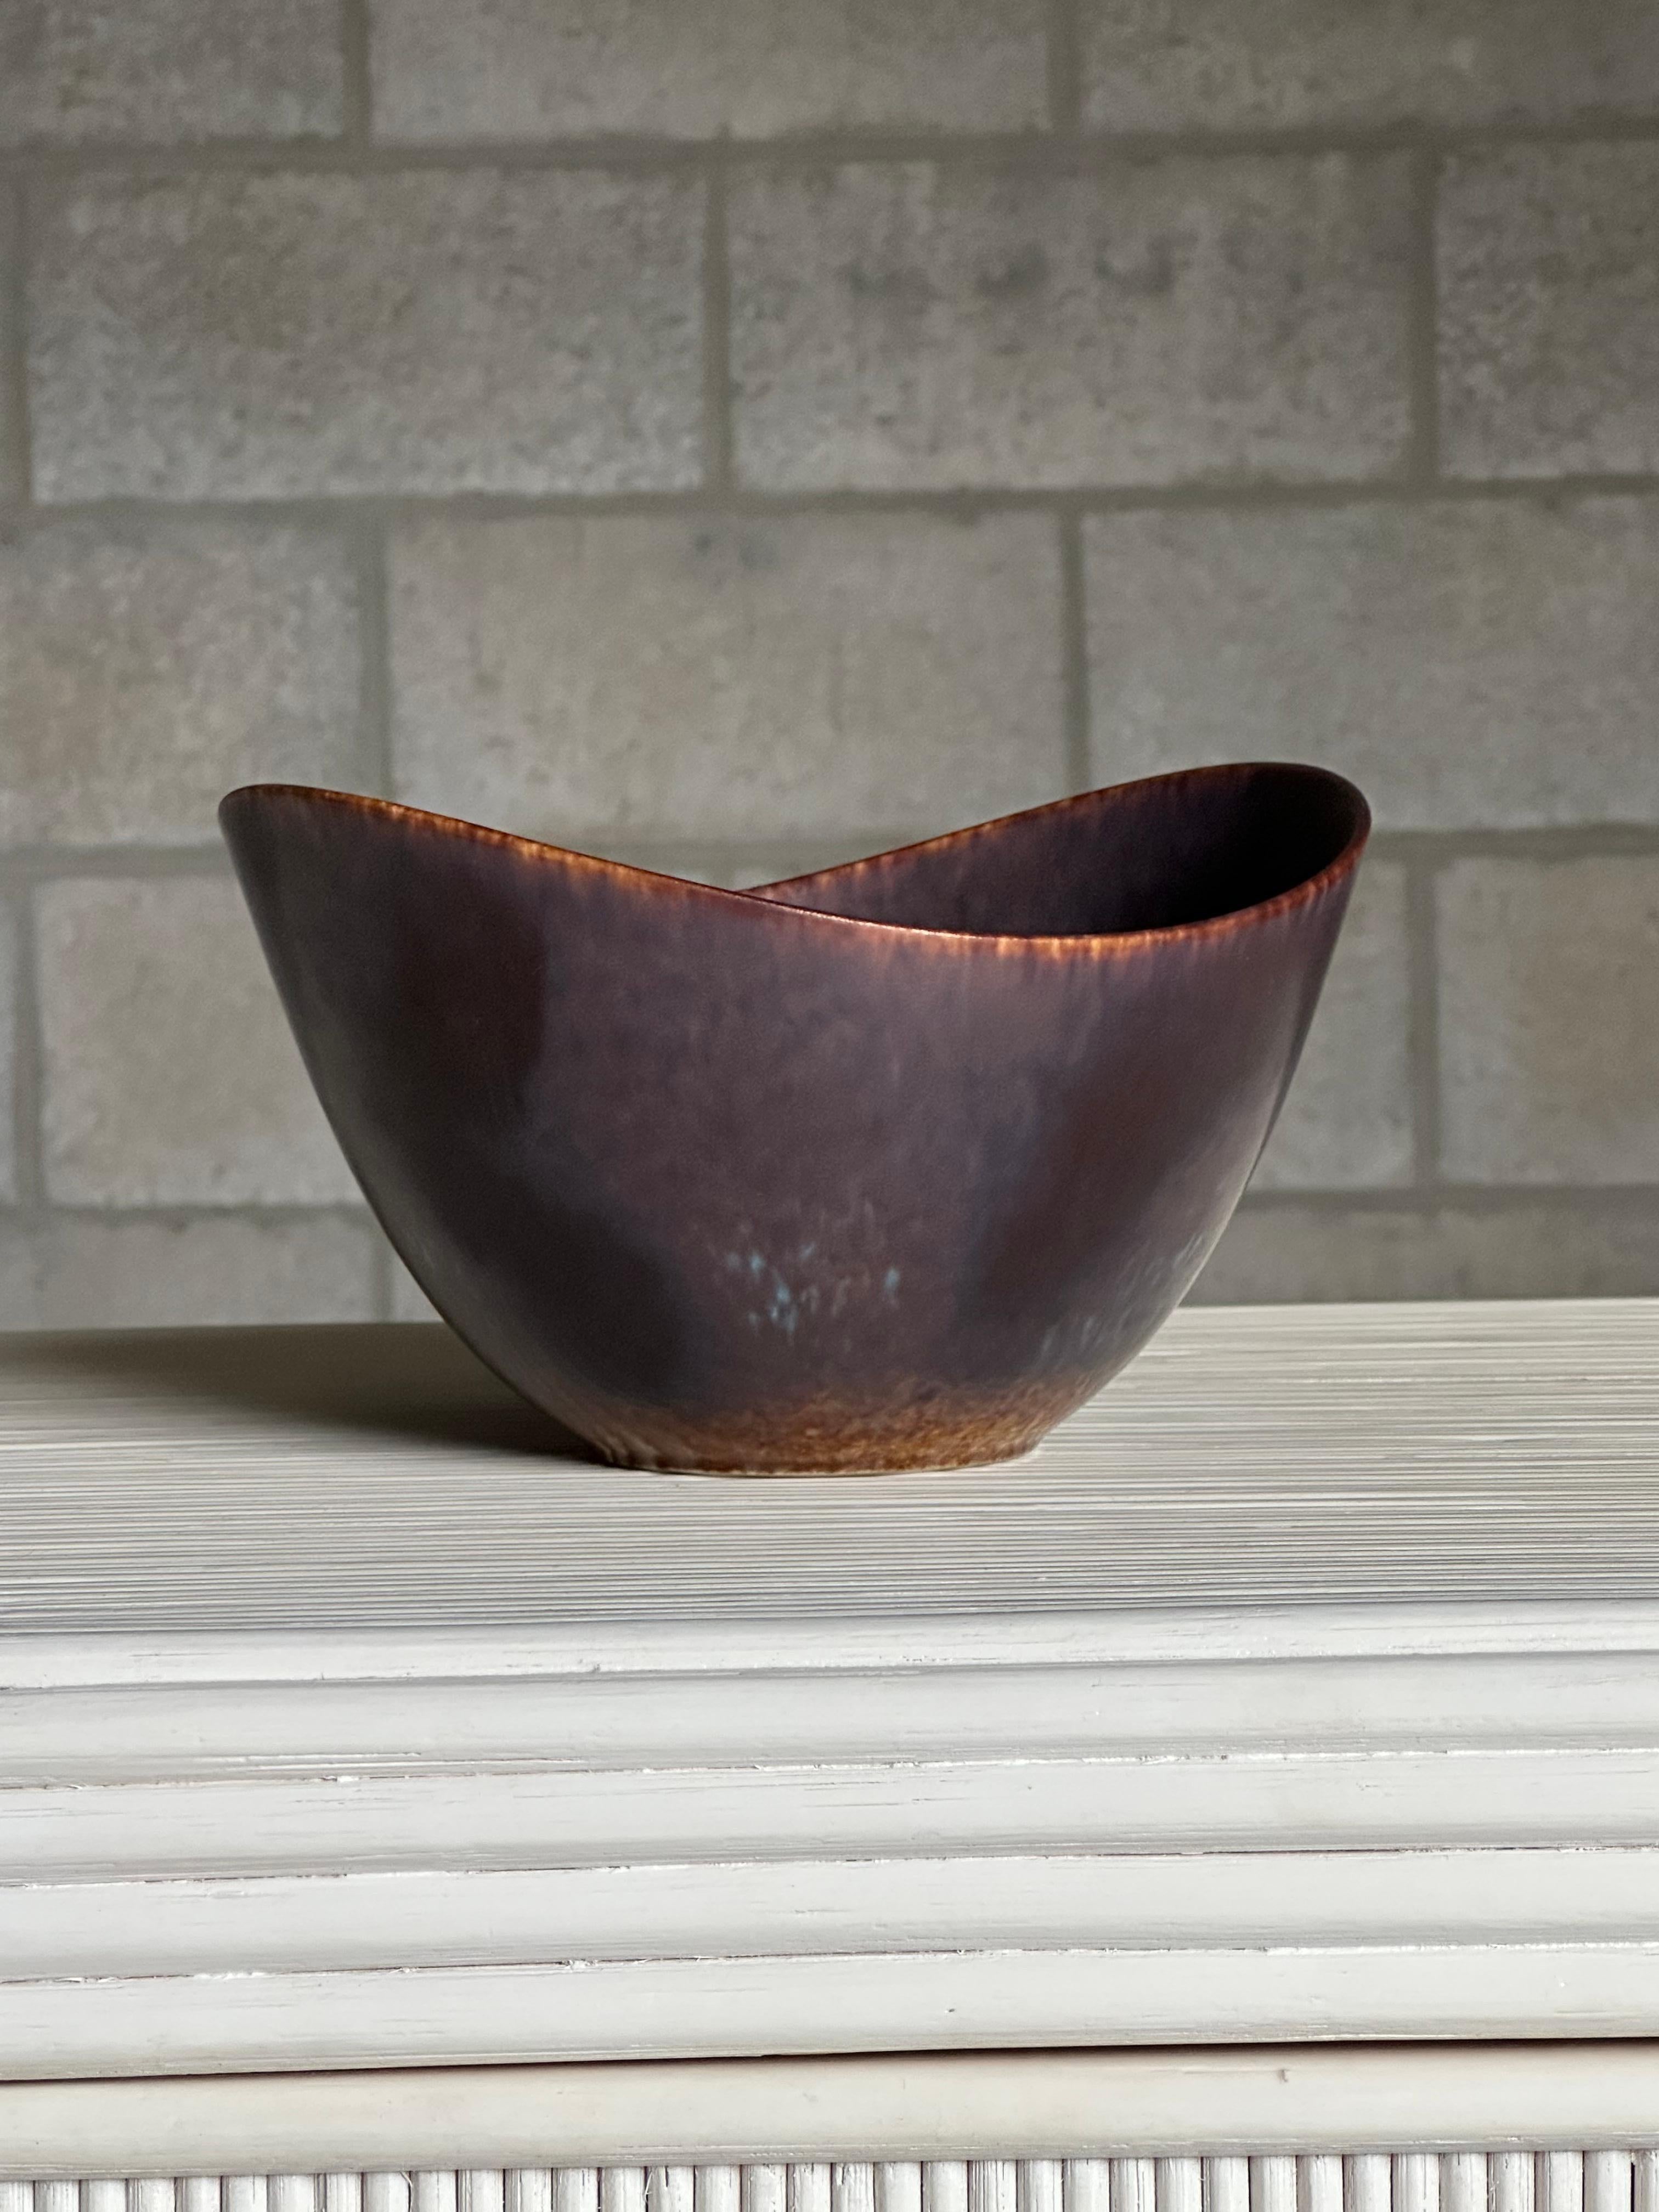 A well sized decorative bowl designed by Gunnar Nylund. Iconic form with great movement iconic of Swedish modern design. Wonderful scale and glaze